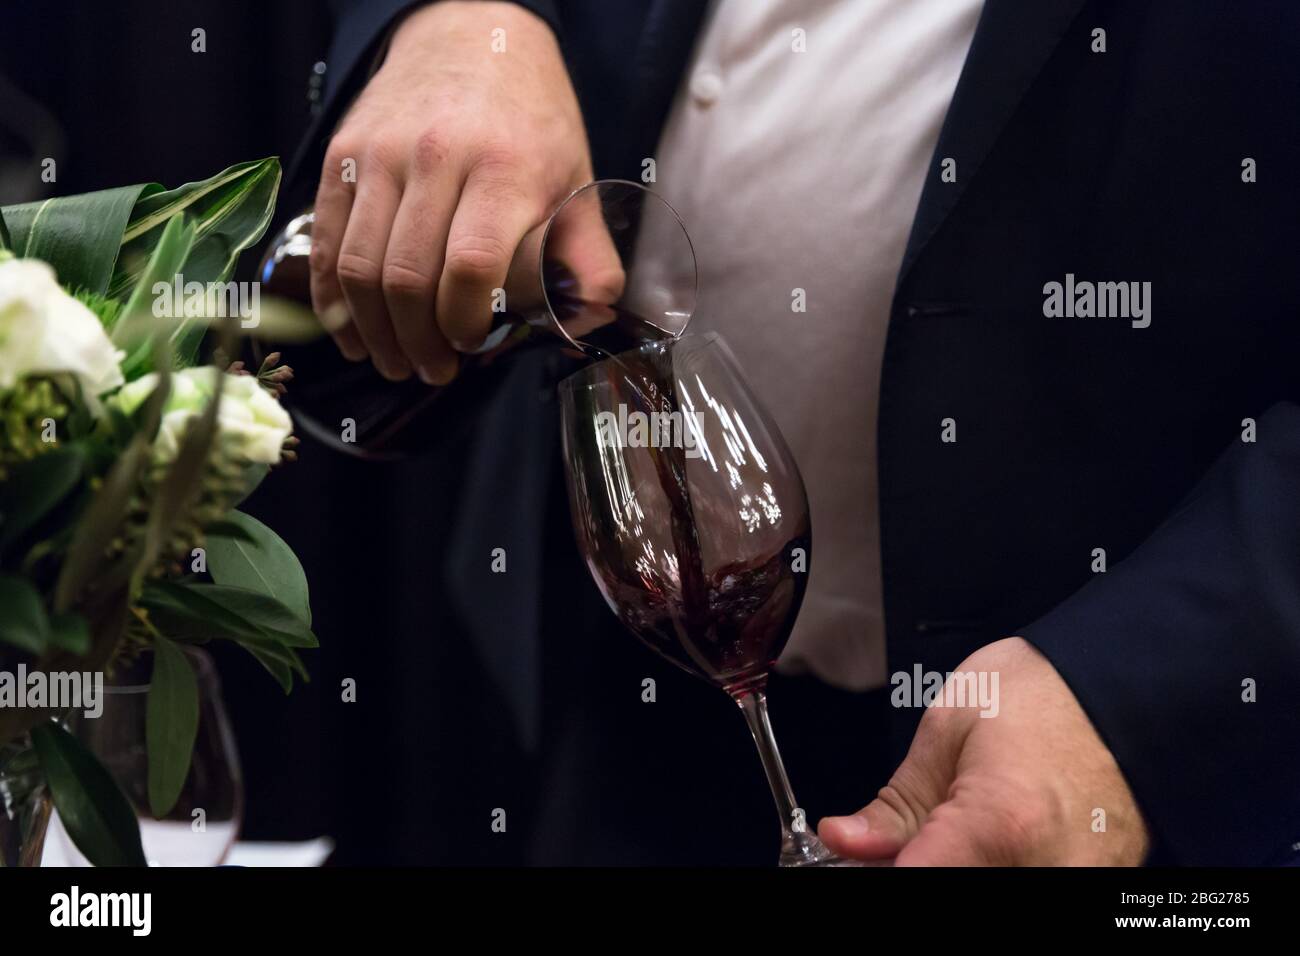 Closeup of a man pouring red wine into a wine glass. Stock Photo